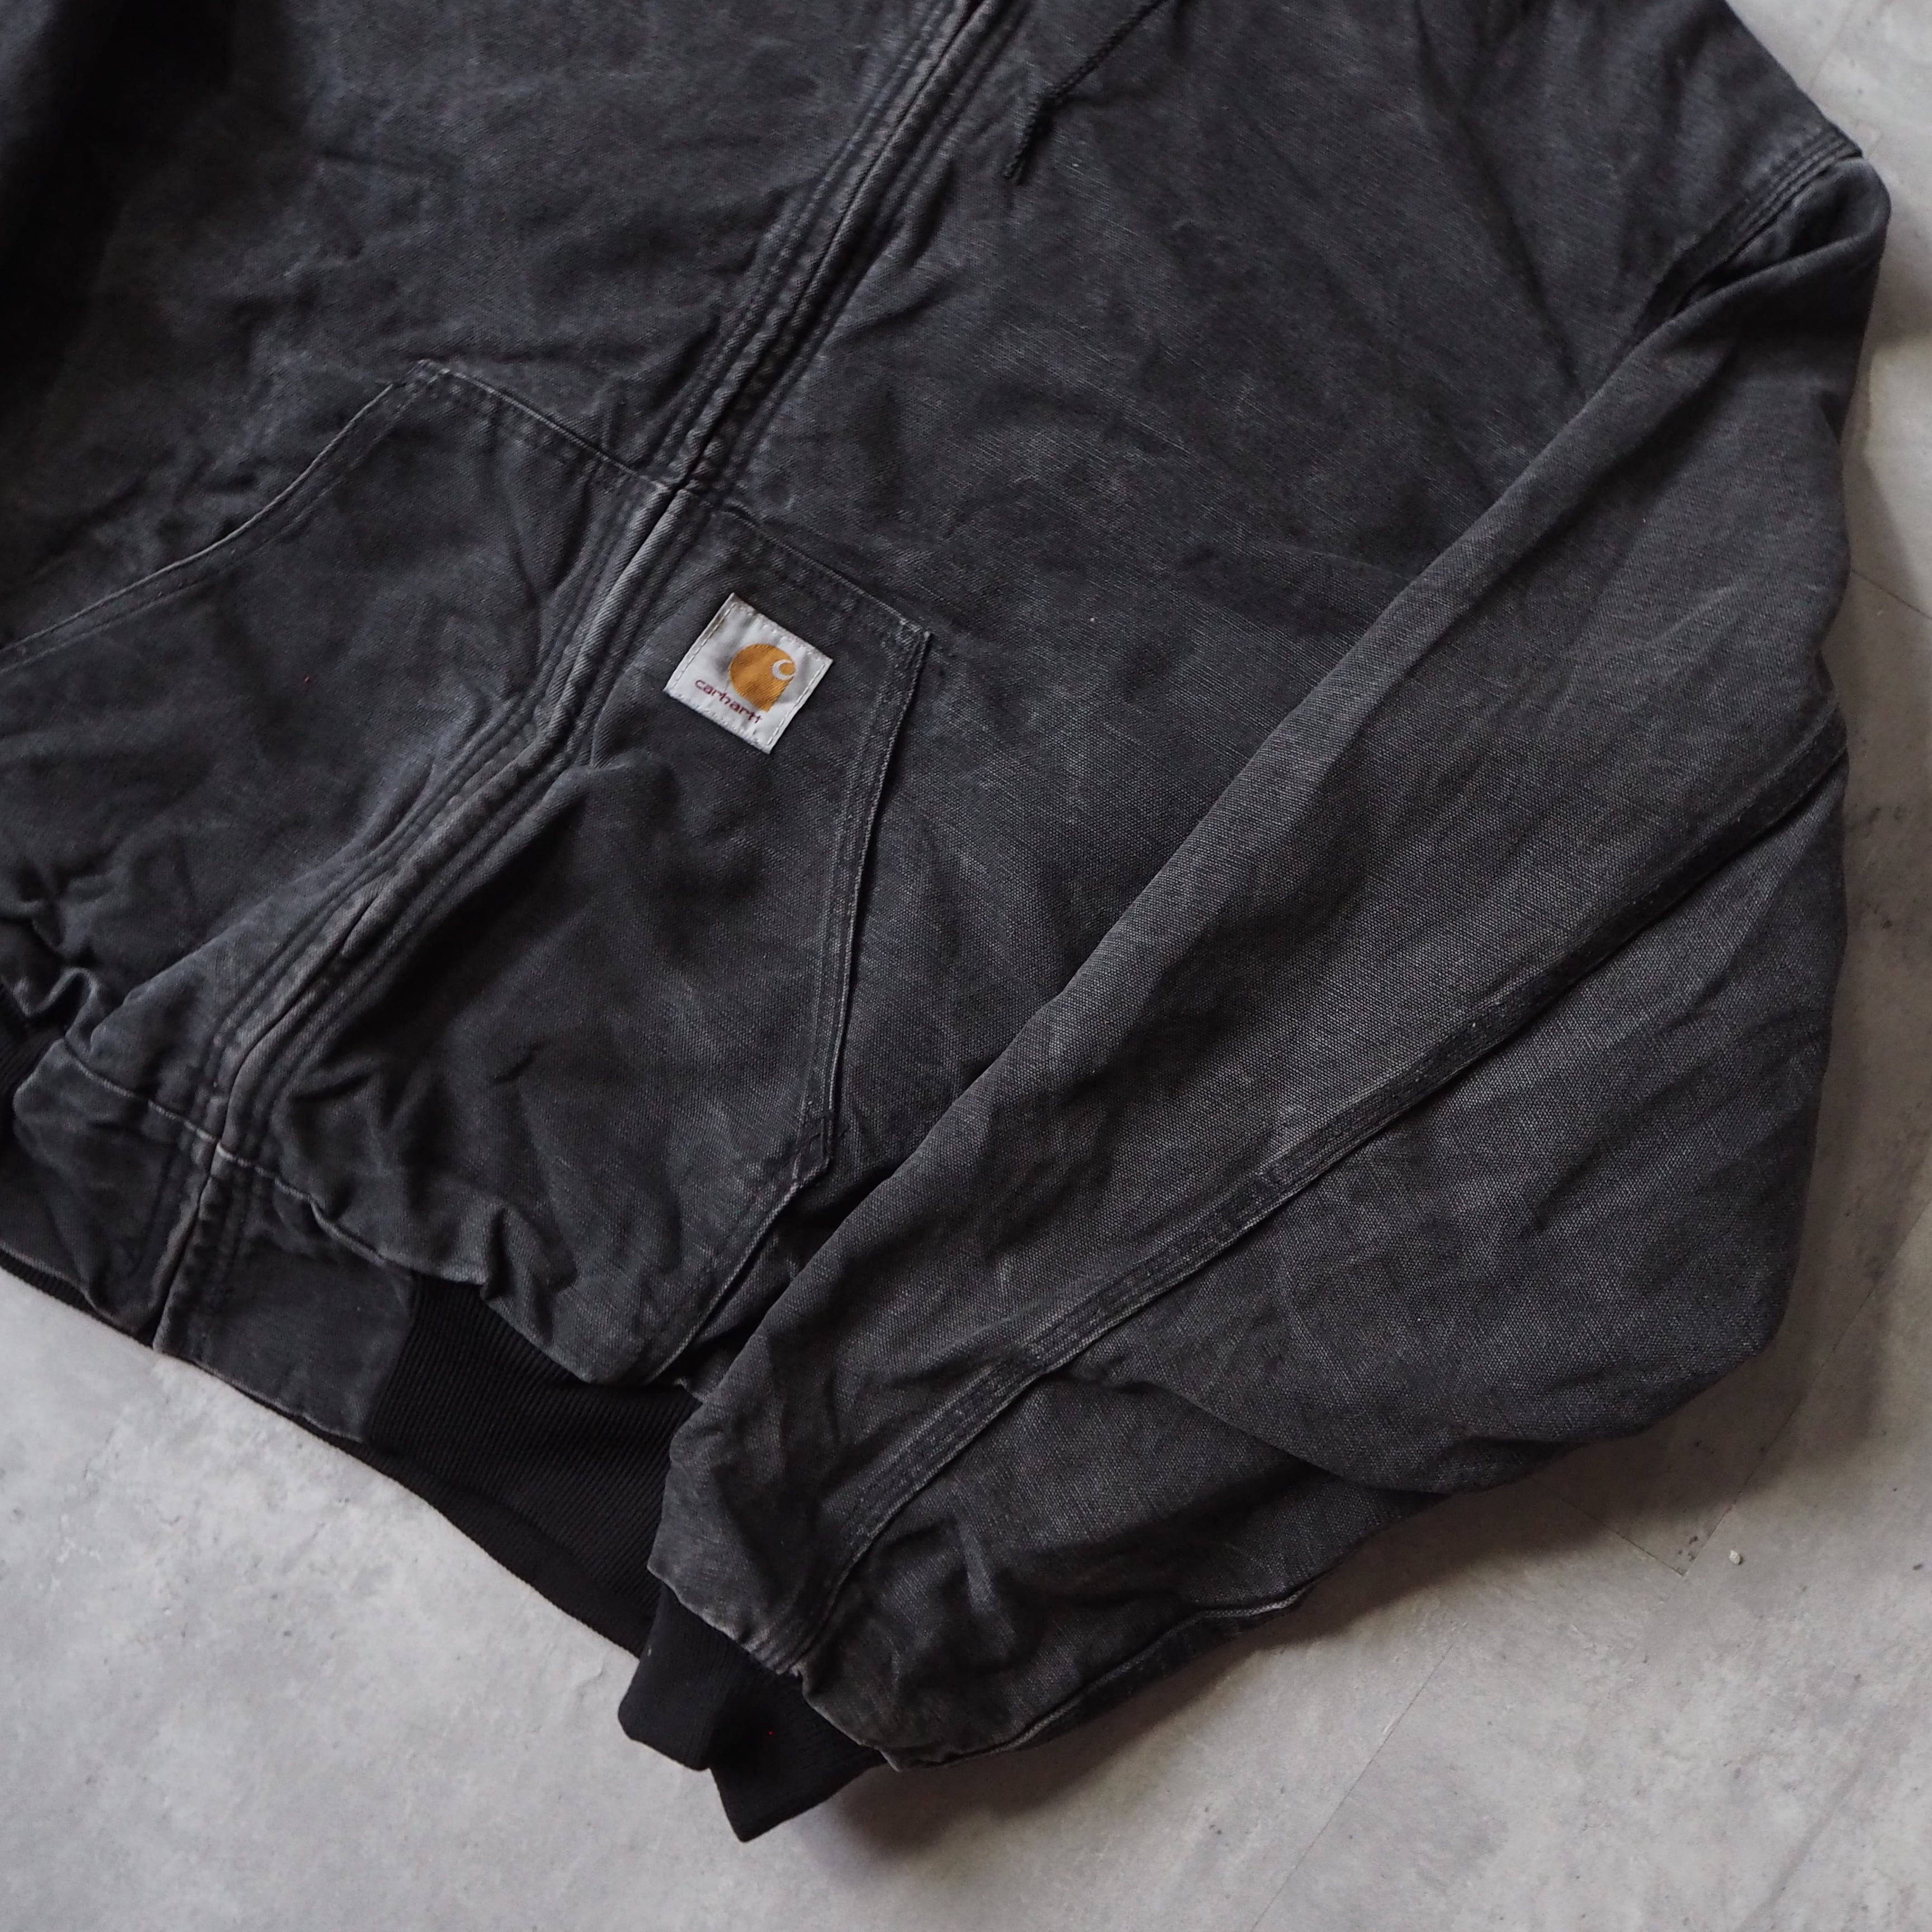 80s-90s “carhartt” deep black active jacket crafted with pride in ...